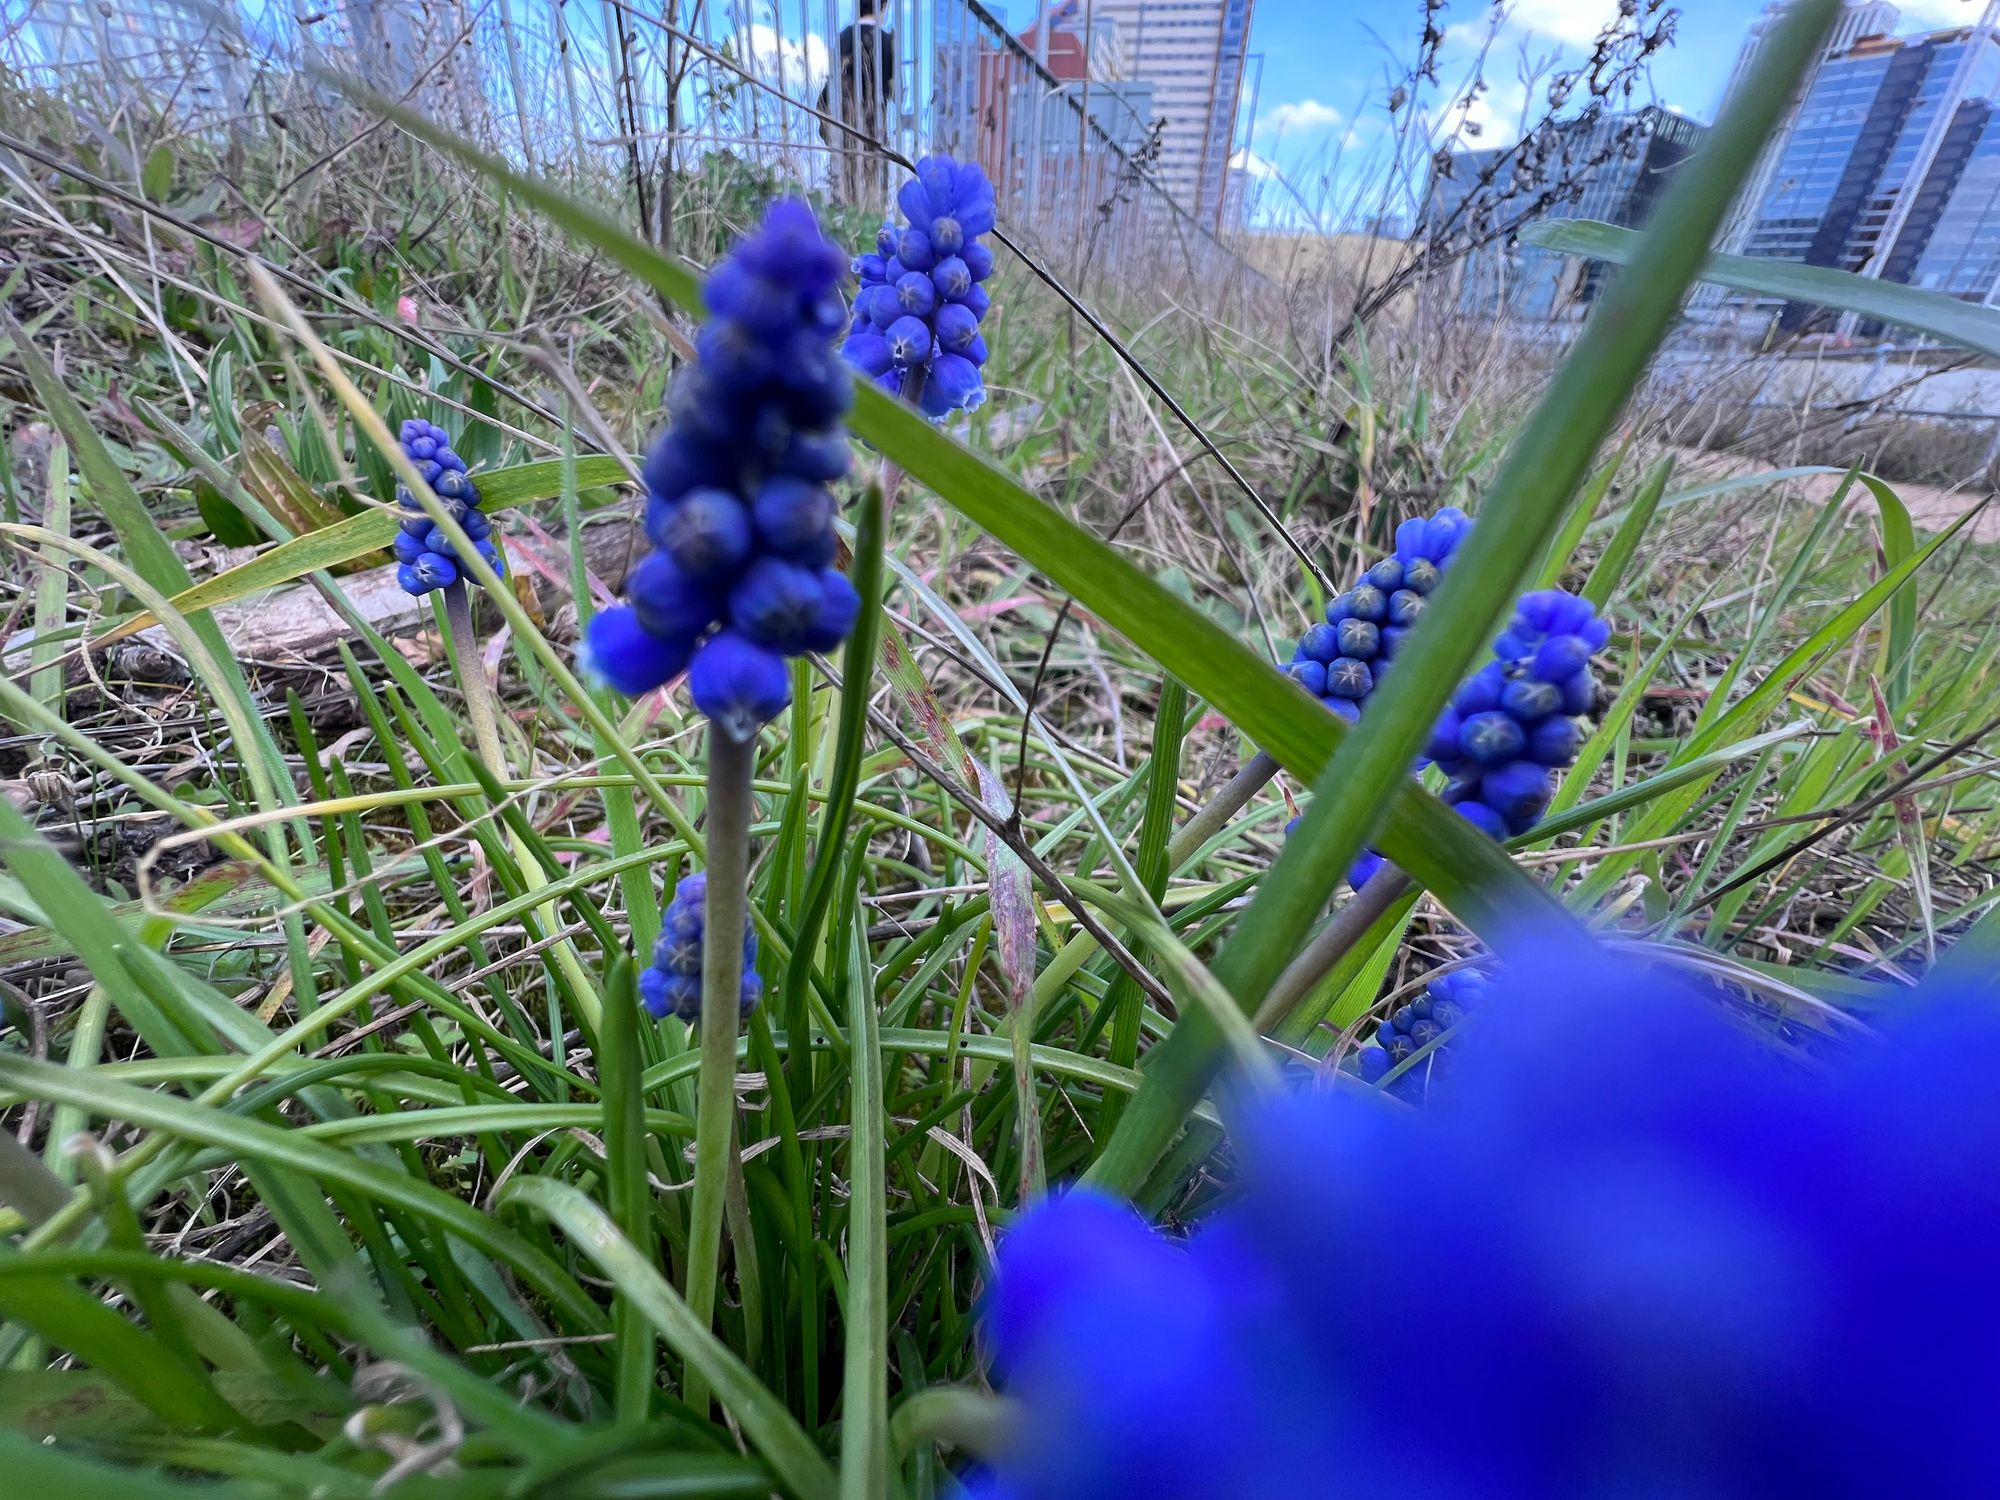 Muscari rise through grass on the side of an embankment.